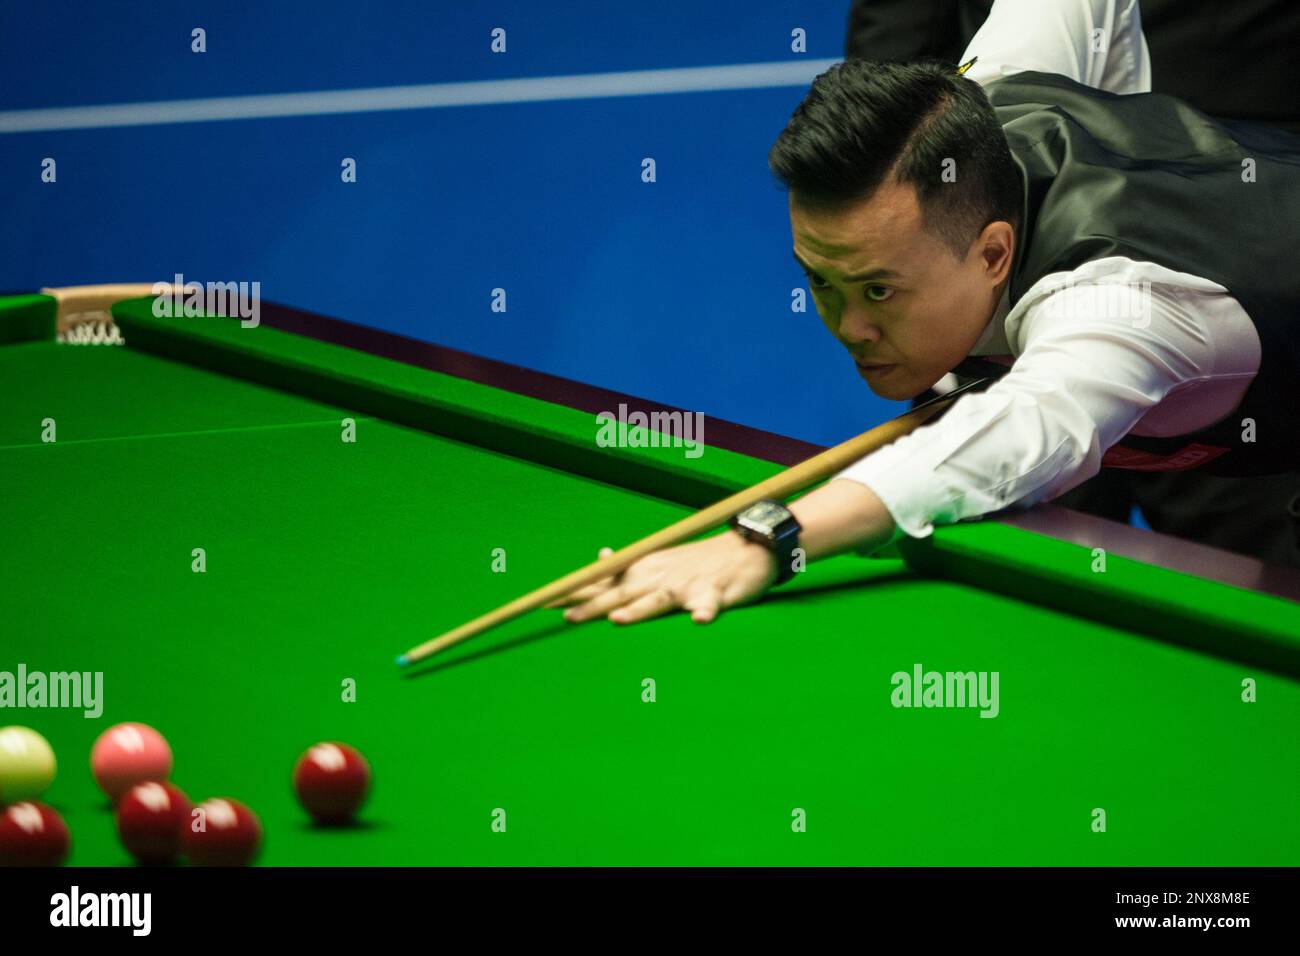 Marco Fu of Hong Kong plays a shot to Lyu Haotian of China in their first round match during the 2018 Betfred World Snooker Championship at the Crucible Theatre in Sheffield, UK,